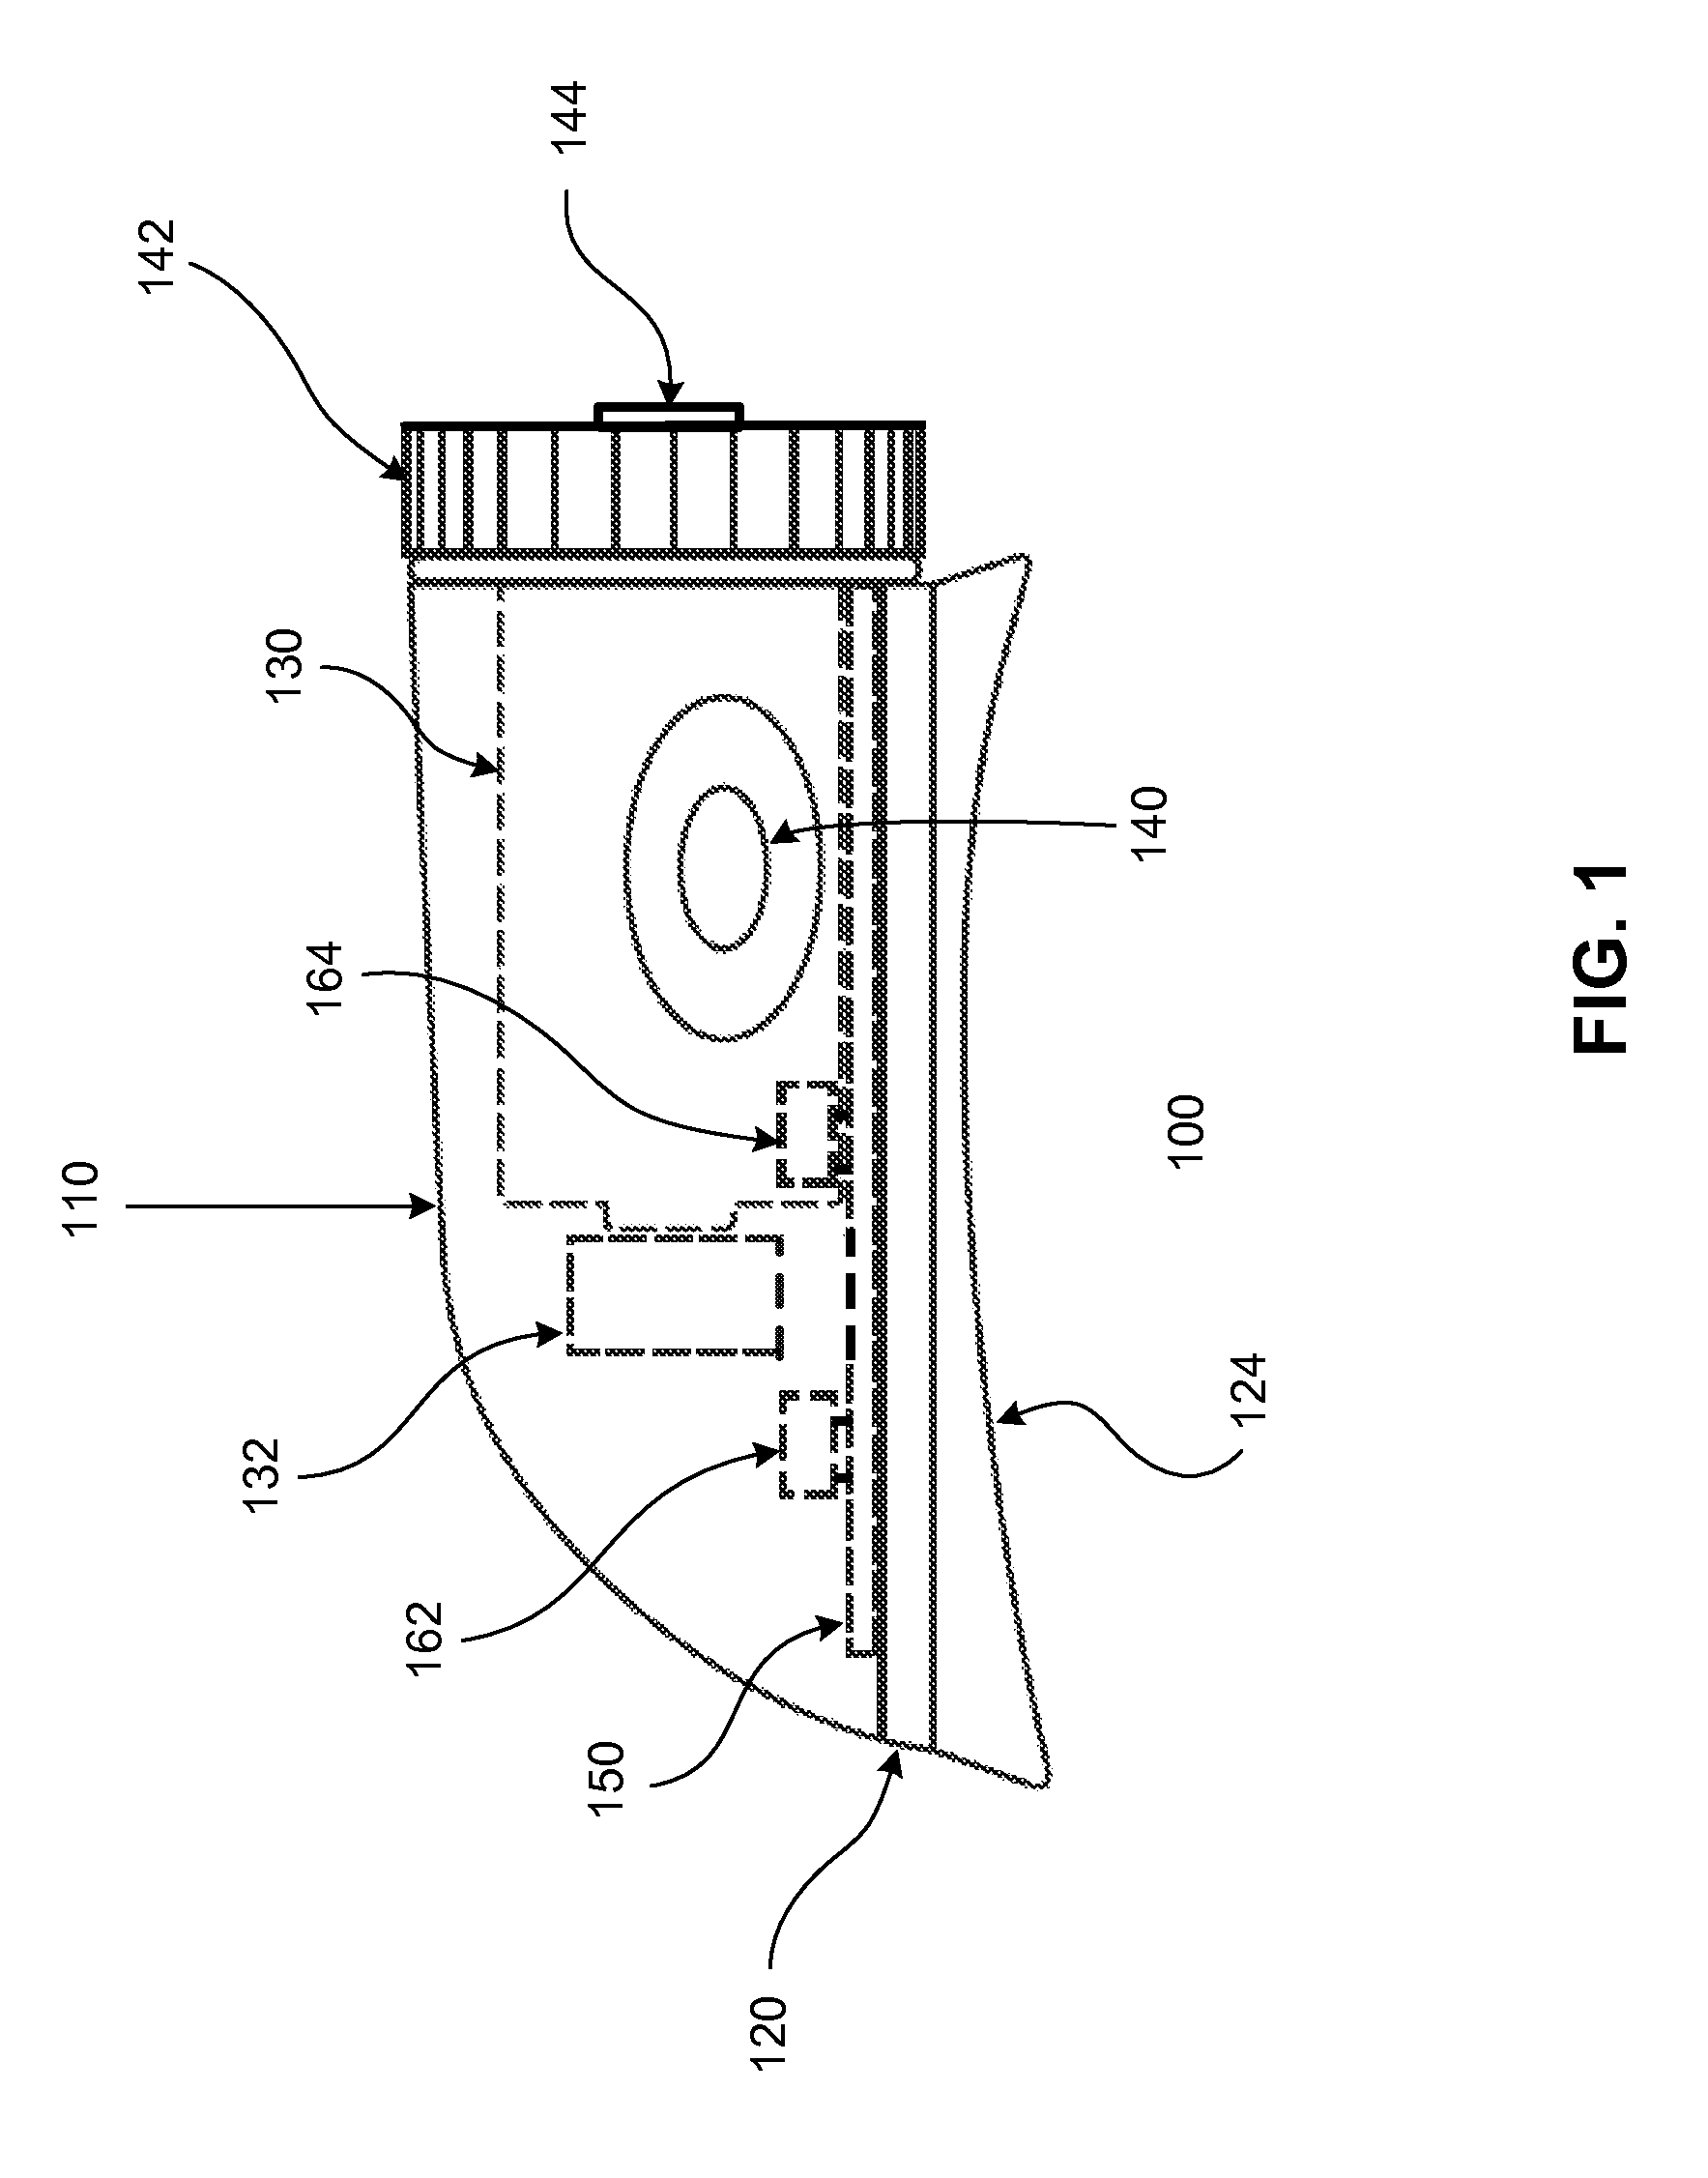 Multi-spectrum lighting device with plurality of switches and tactile feedback